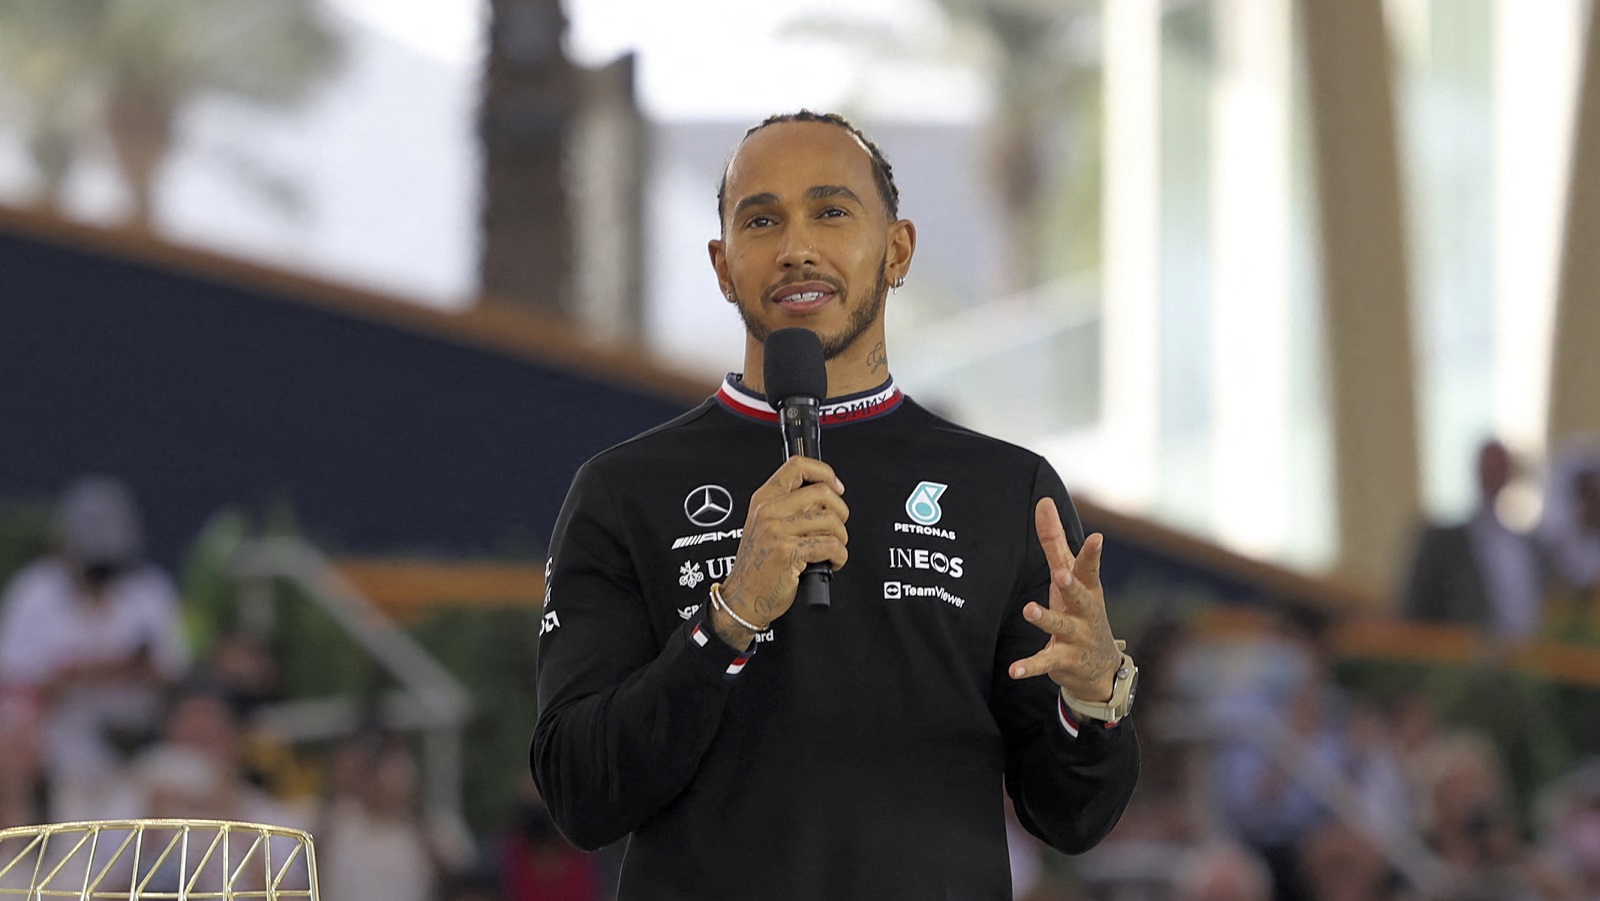 Lewis Hamilton Revealed a Surprising Change With the Start of the Formula 1 Season Just Days Away